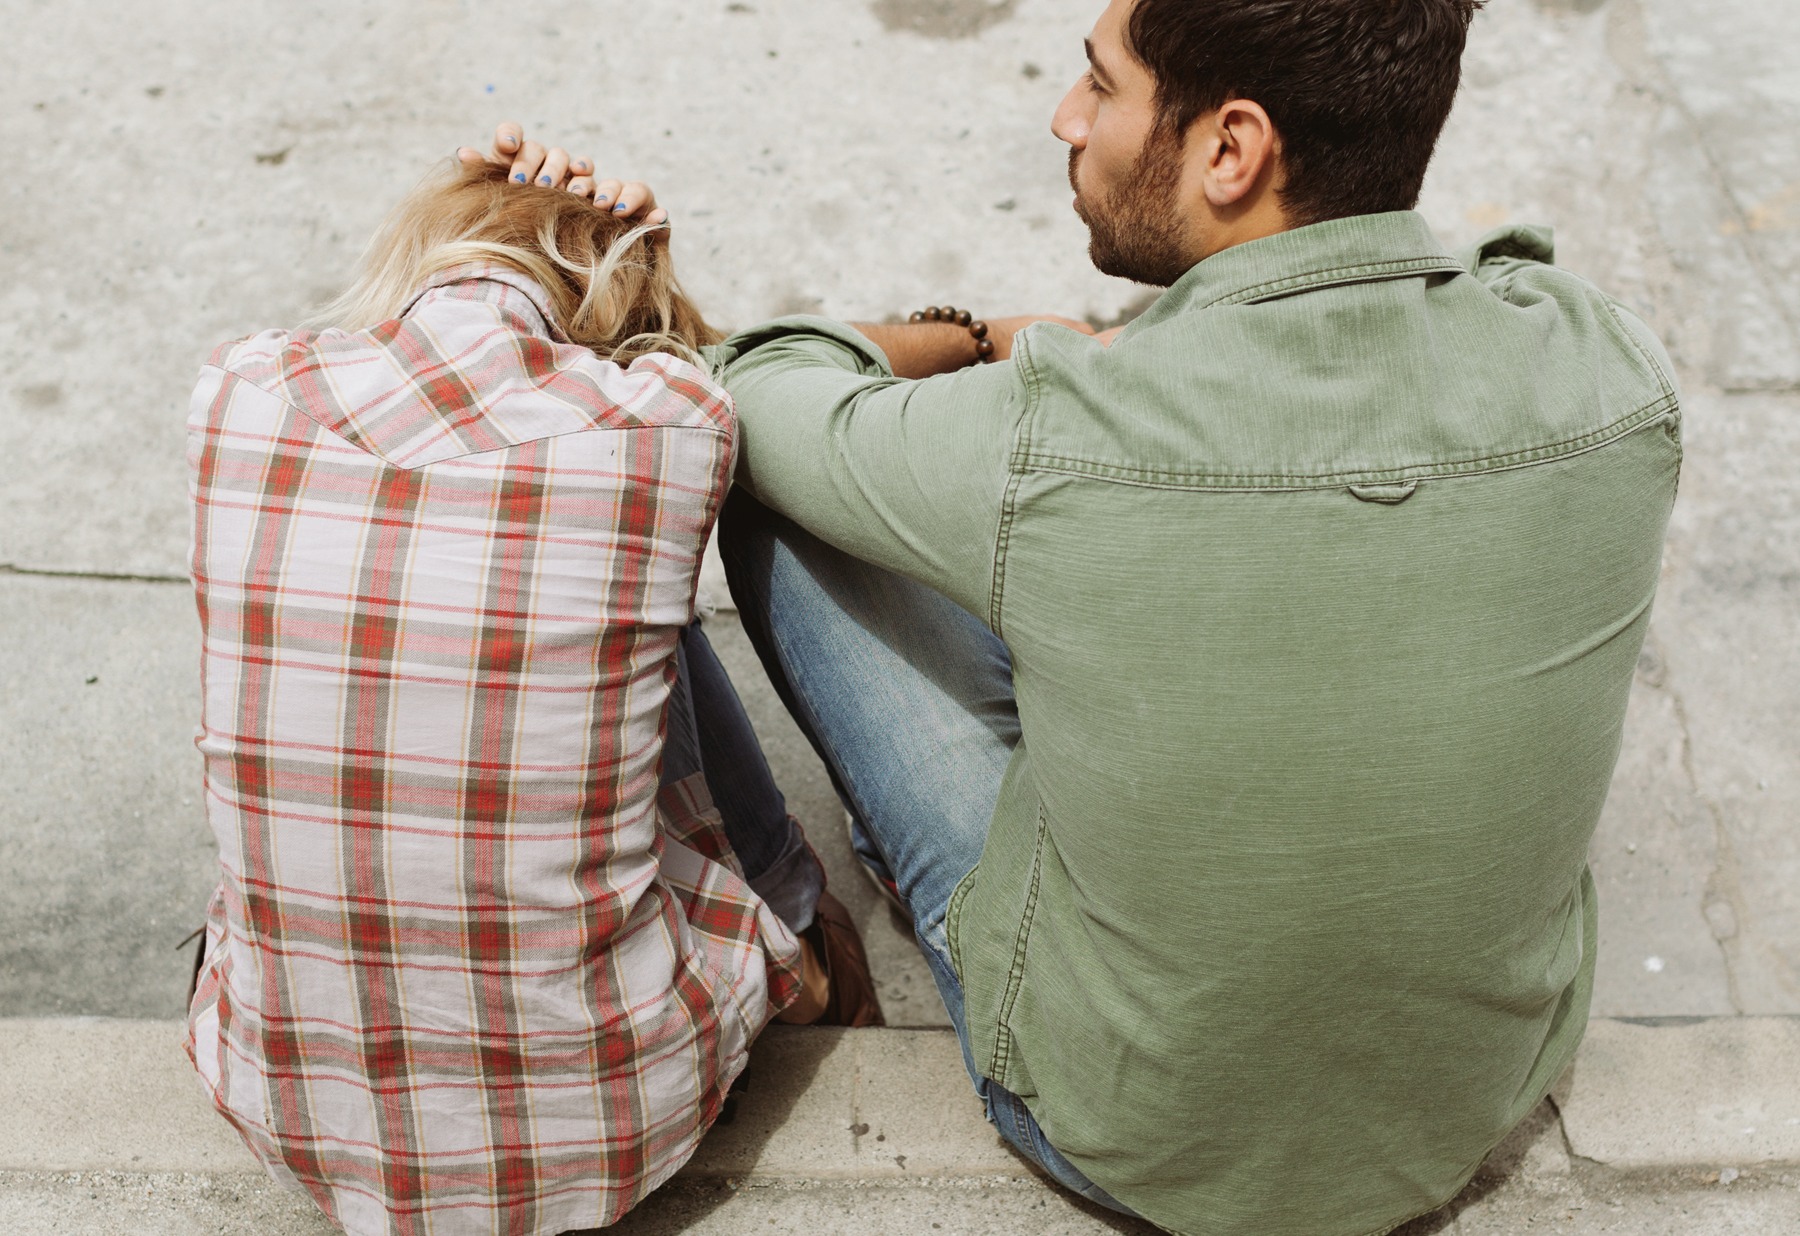 6 Reasons To Come To Marriage Counseling